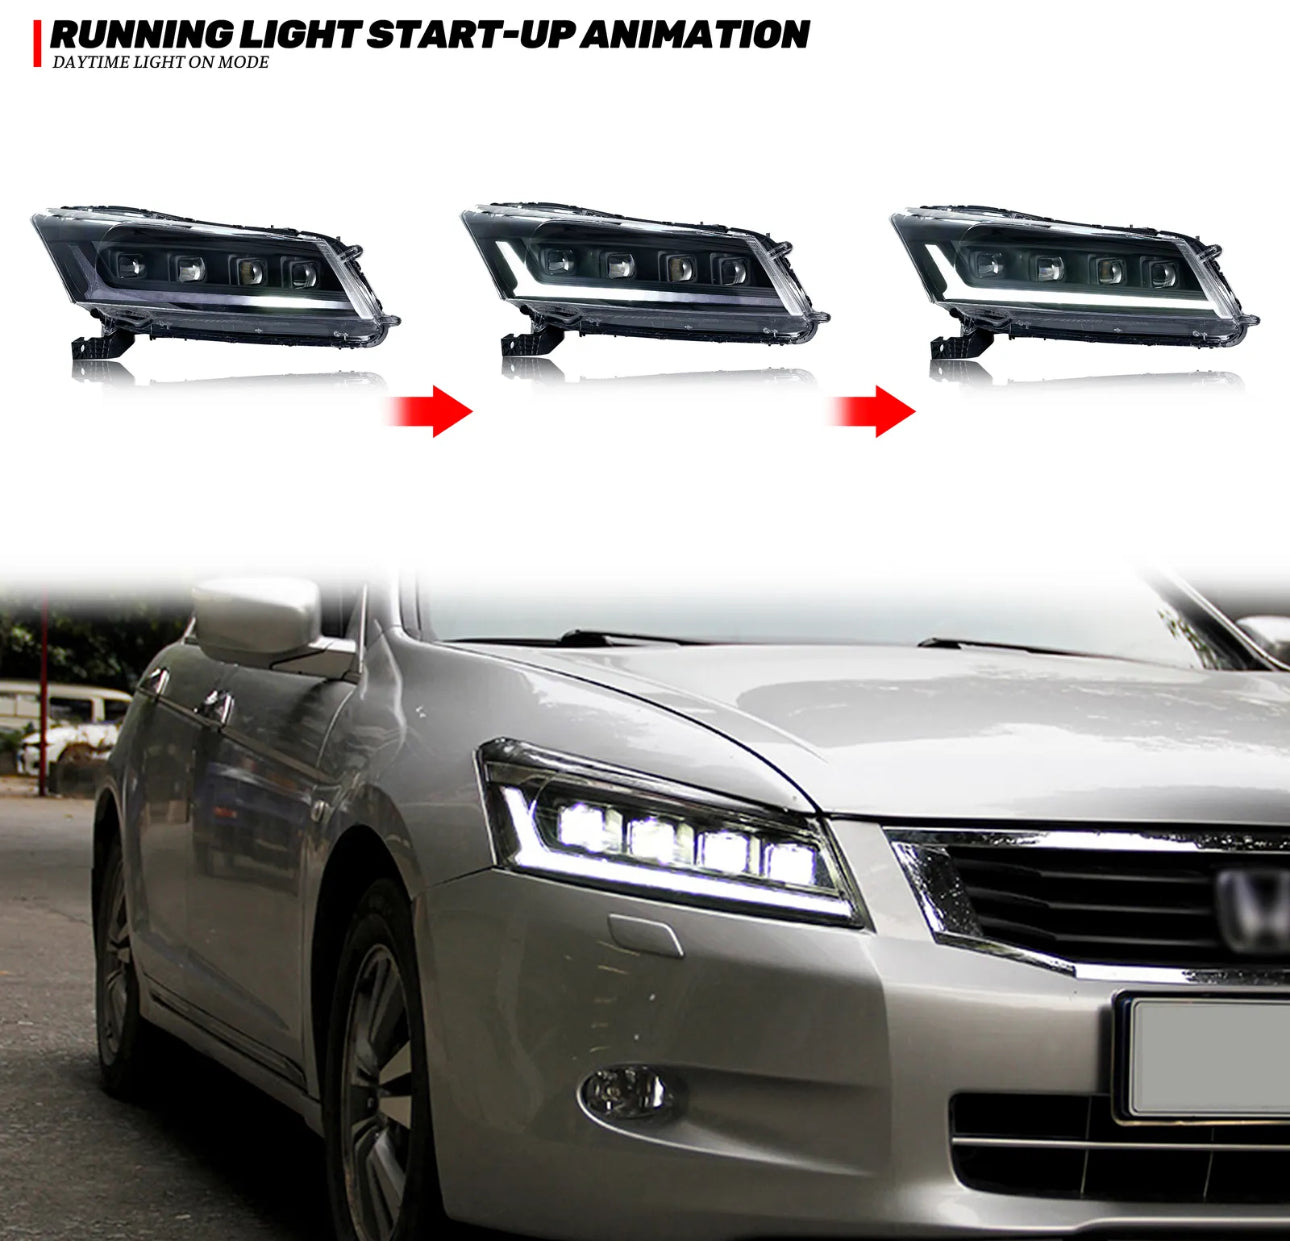 LED Sequential Headlight For Honda Accord 8TH GEN 2008-2012 Animation Front Lamp